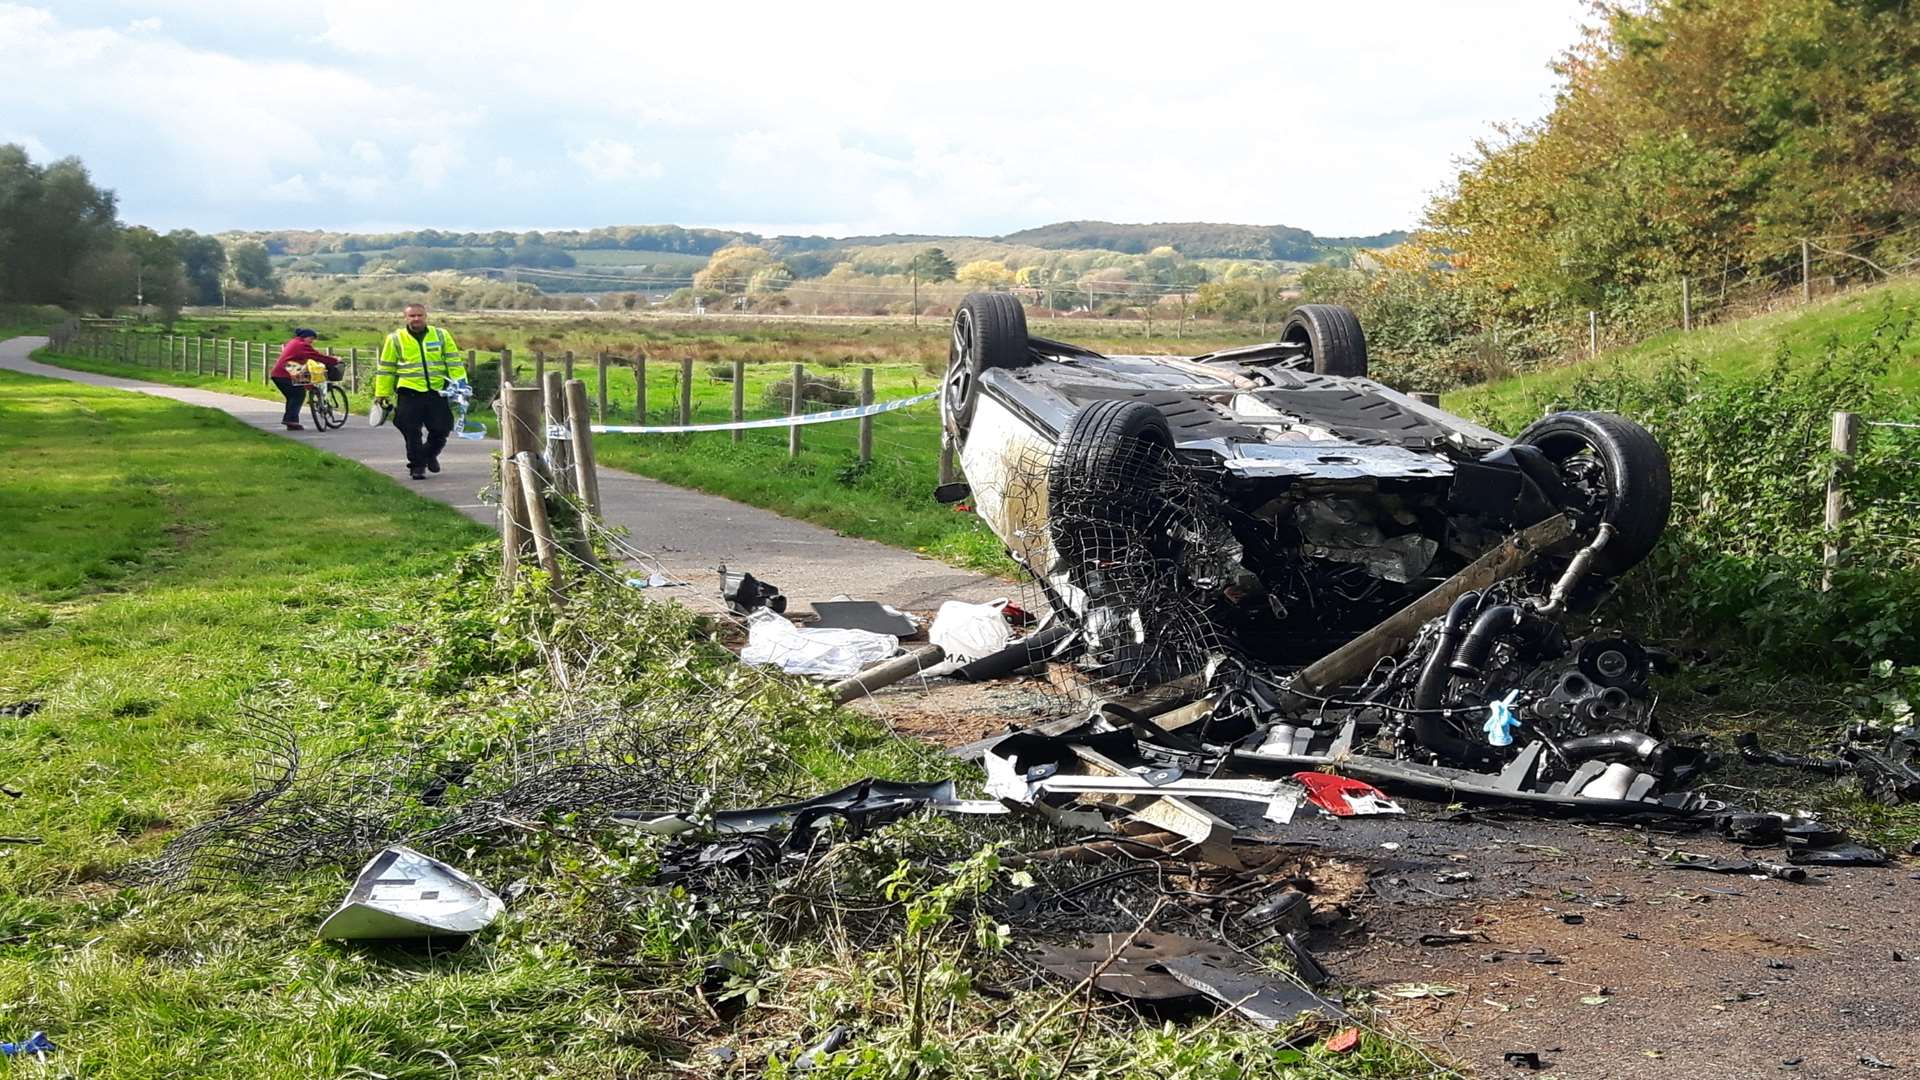 The wrecked car on the cycle path